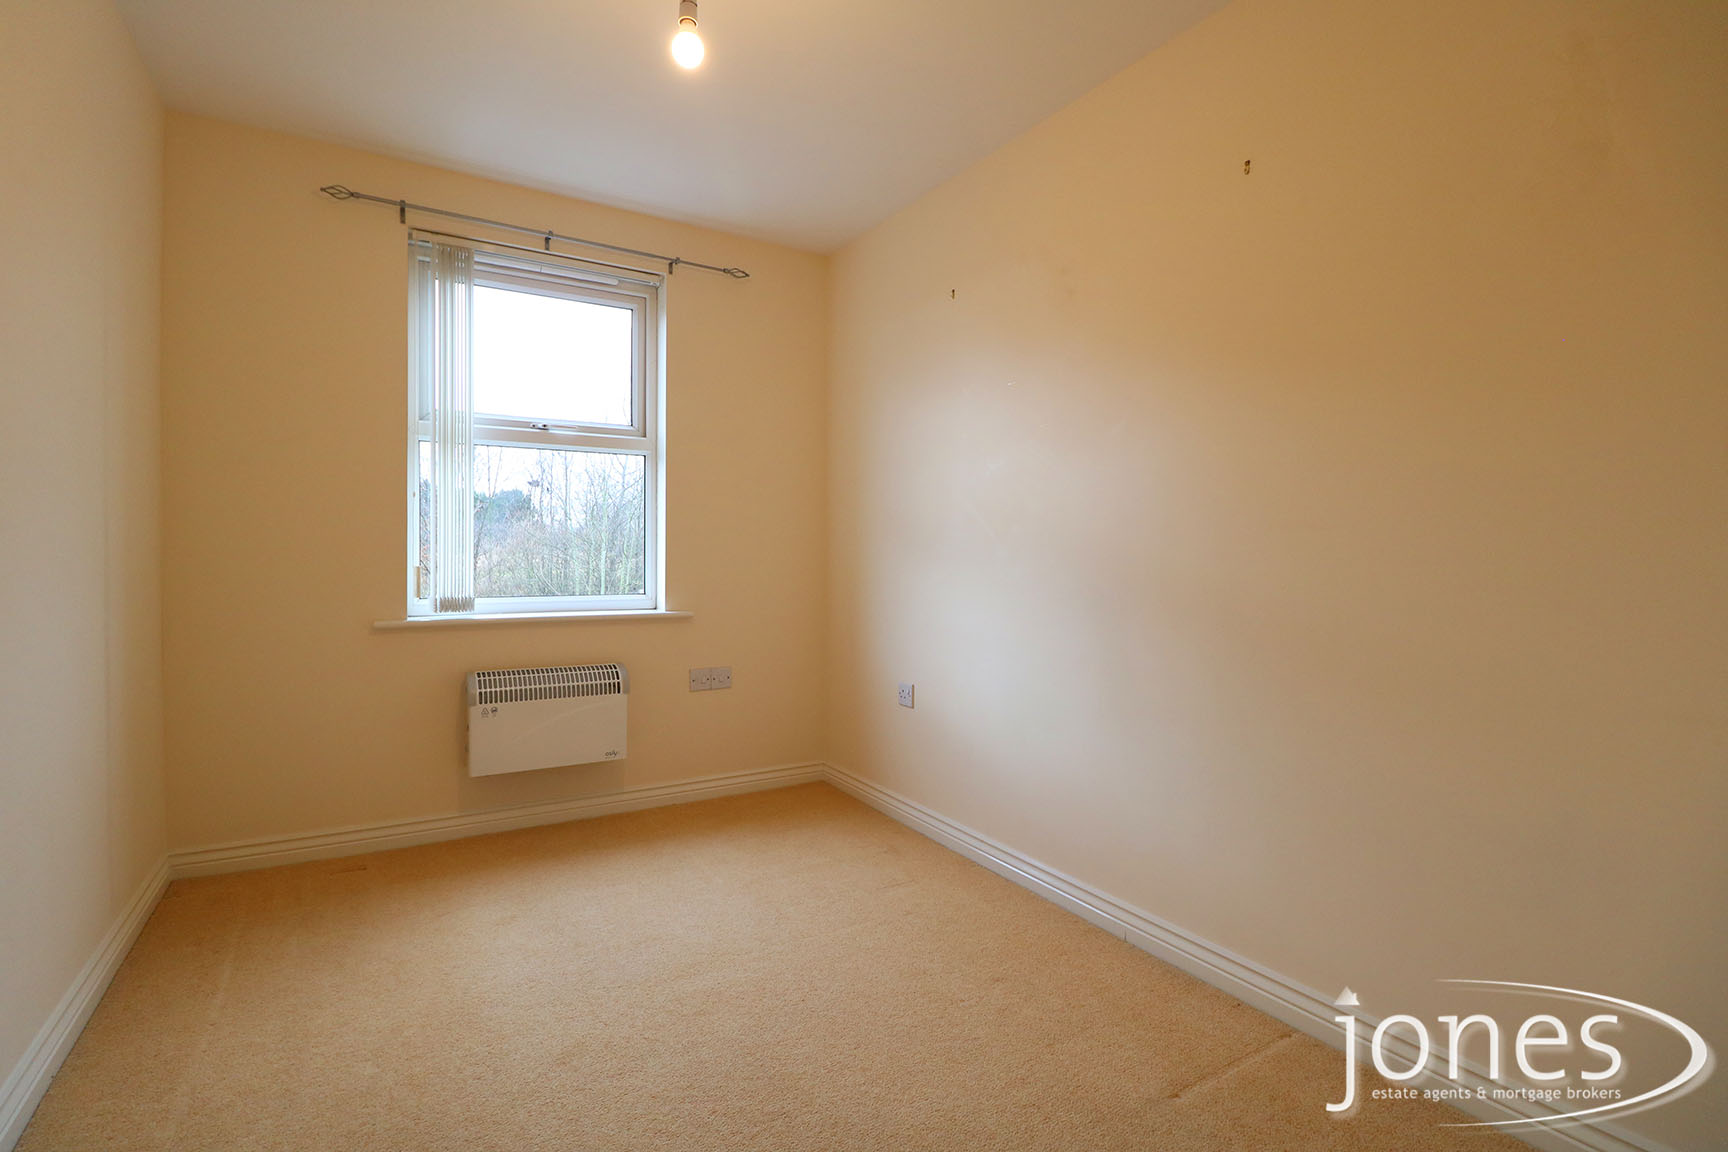 Home for Sale Let - Photo 06 Lowther Drive, Darlington, DL1 4LZ